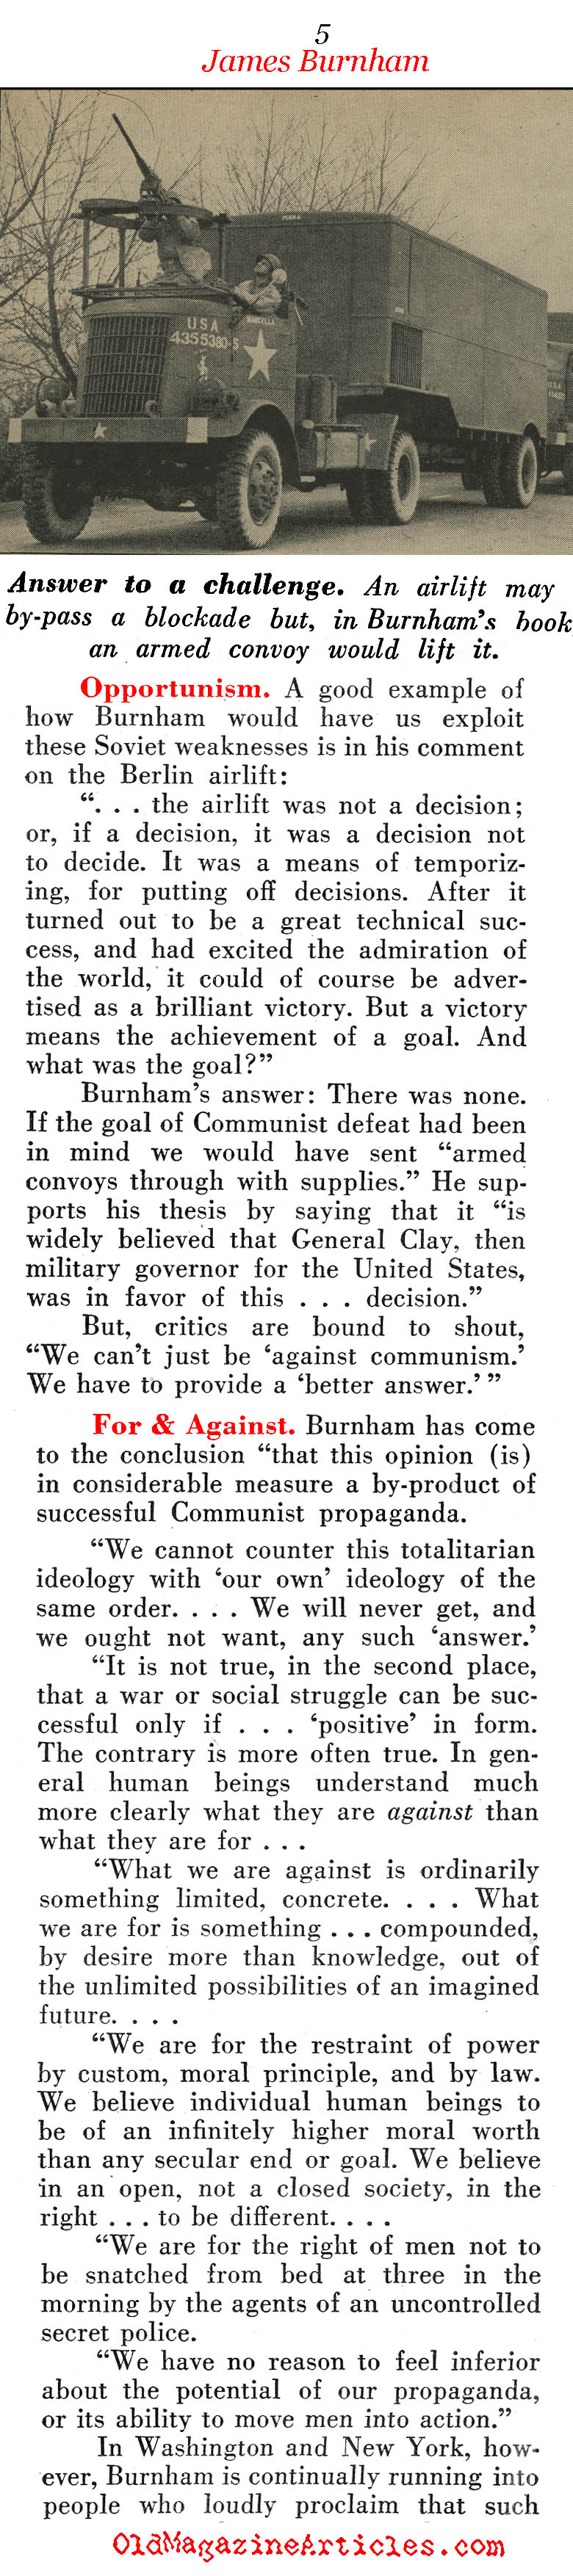 The Necessity of Overthrowing Russia (Pathfinder Magazine, 1950)